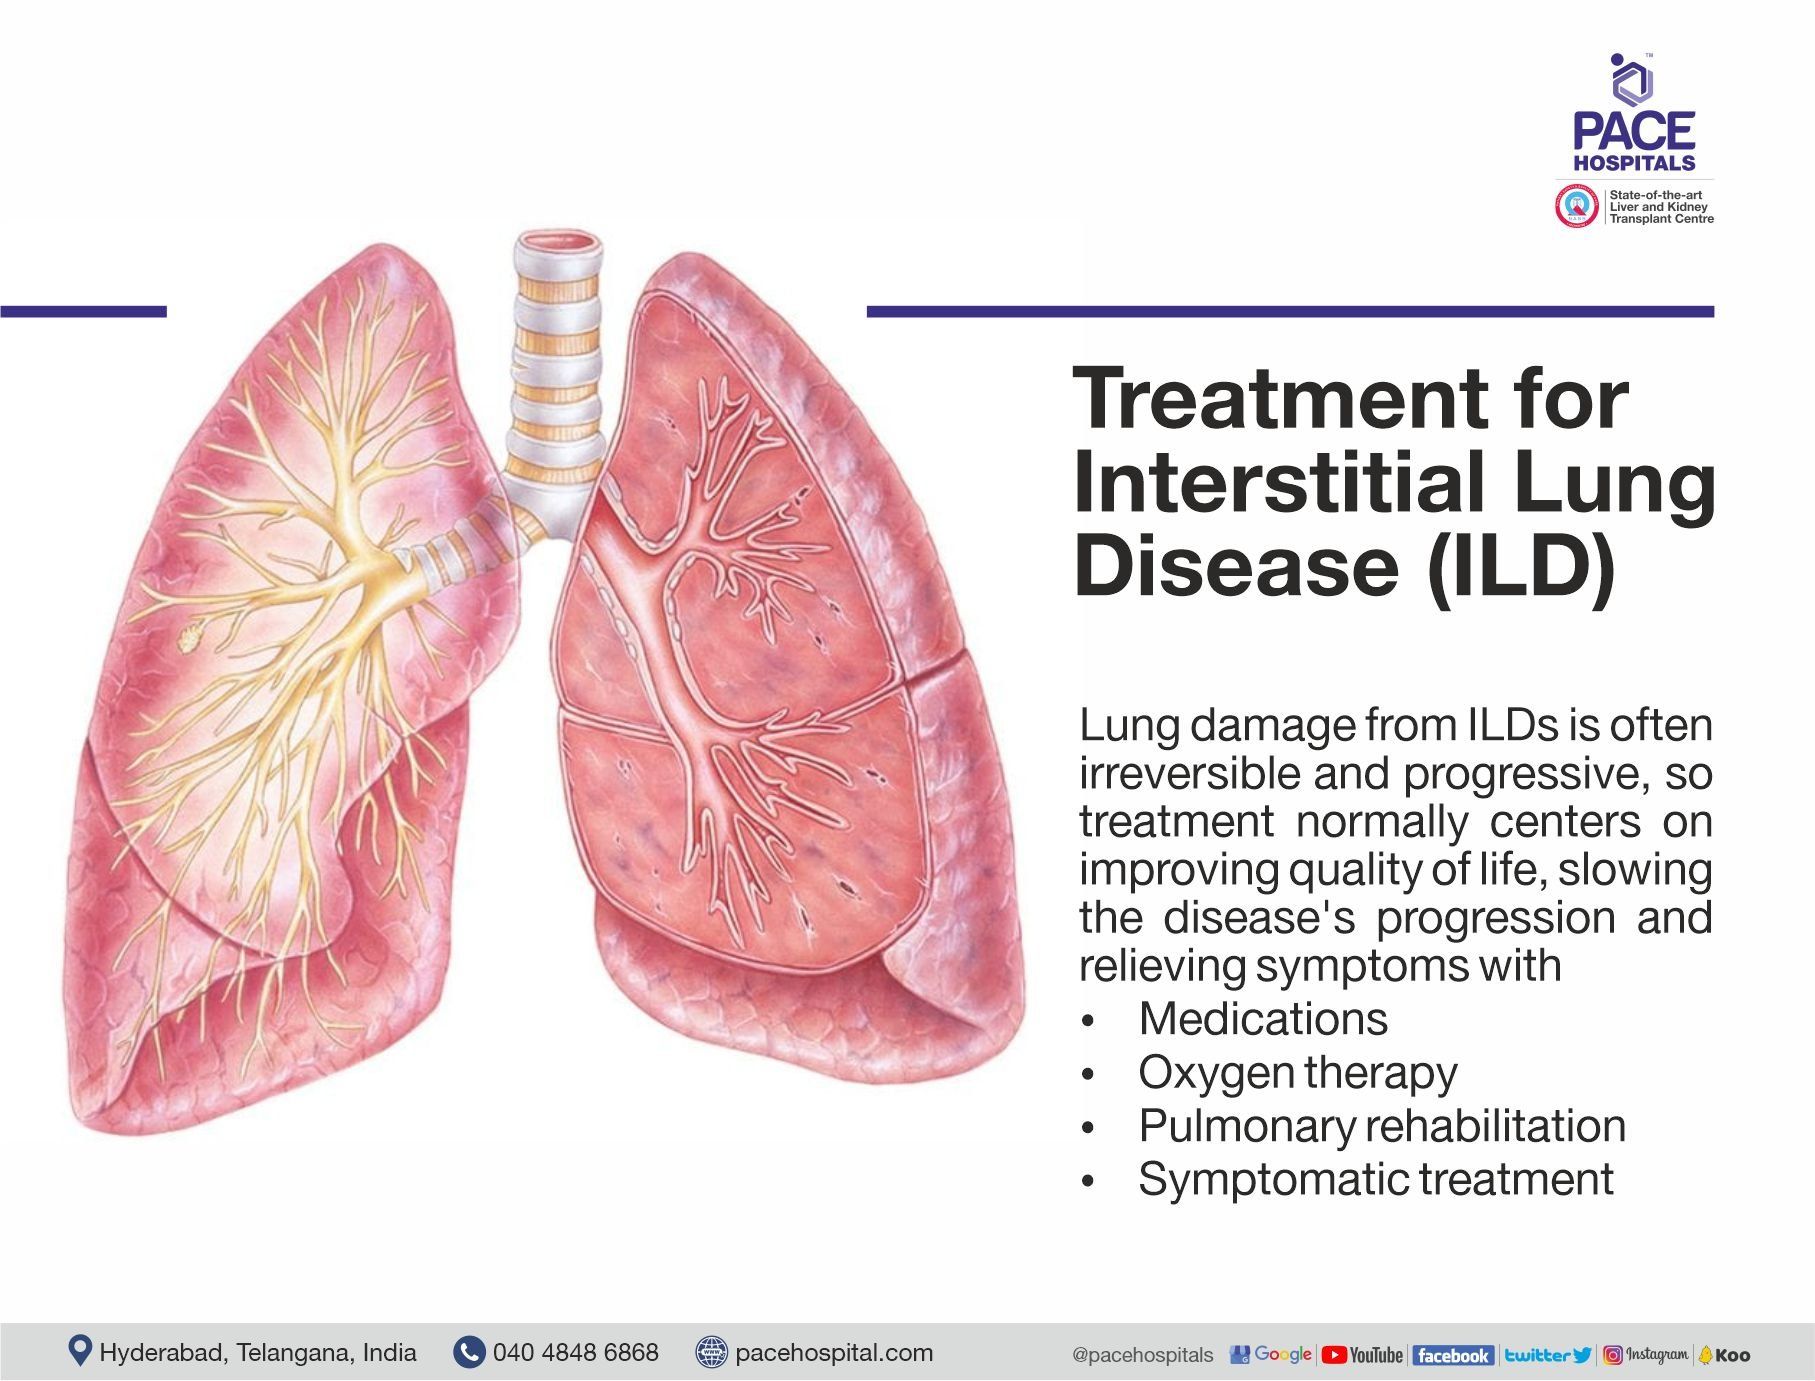 Symptoms of Interstitial Lung Disease (ILD) | Pace Hospitals